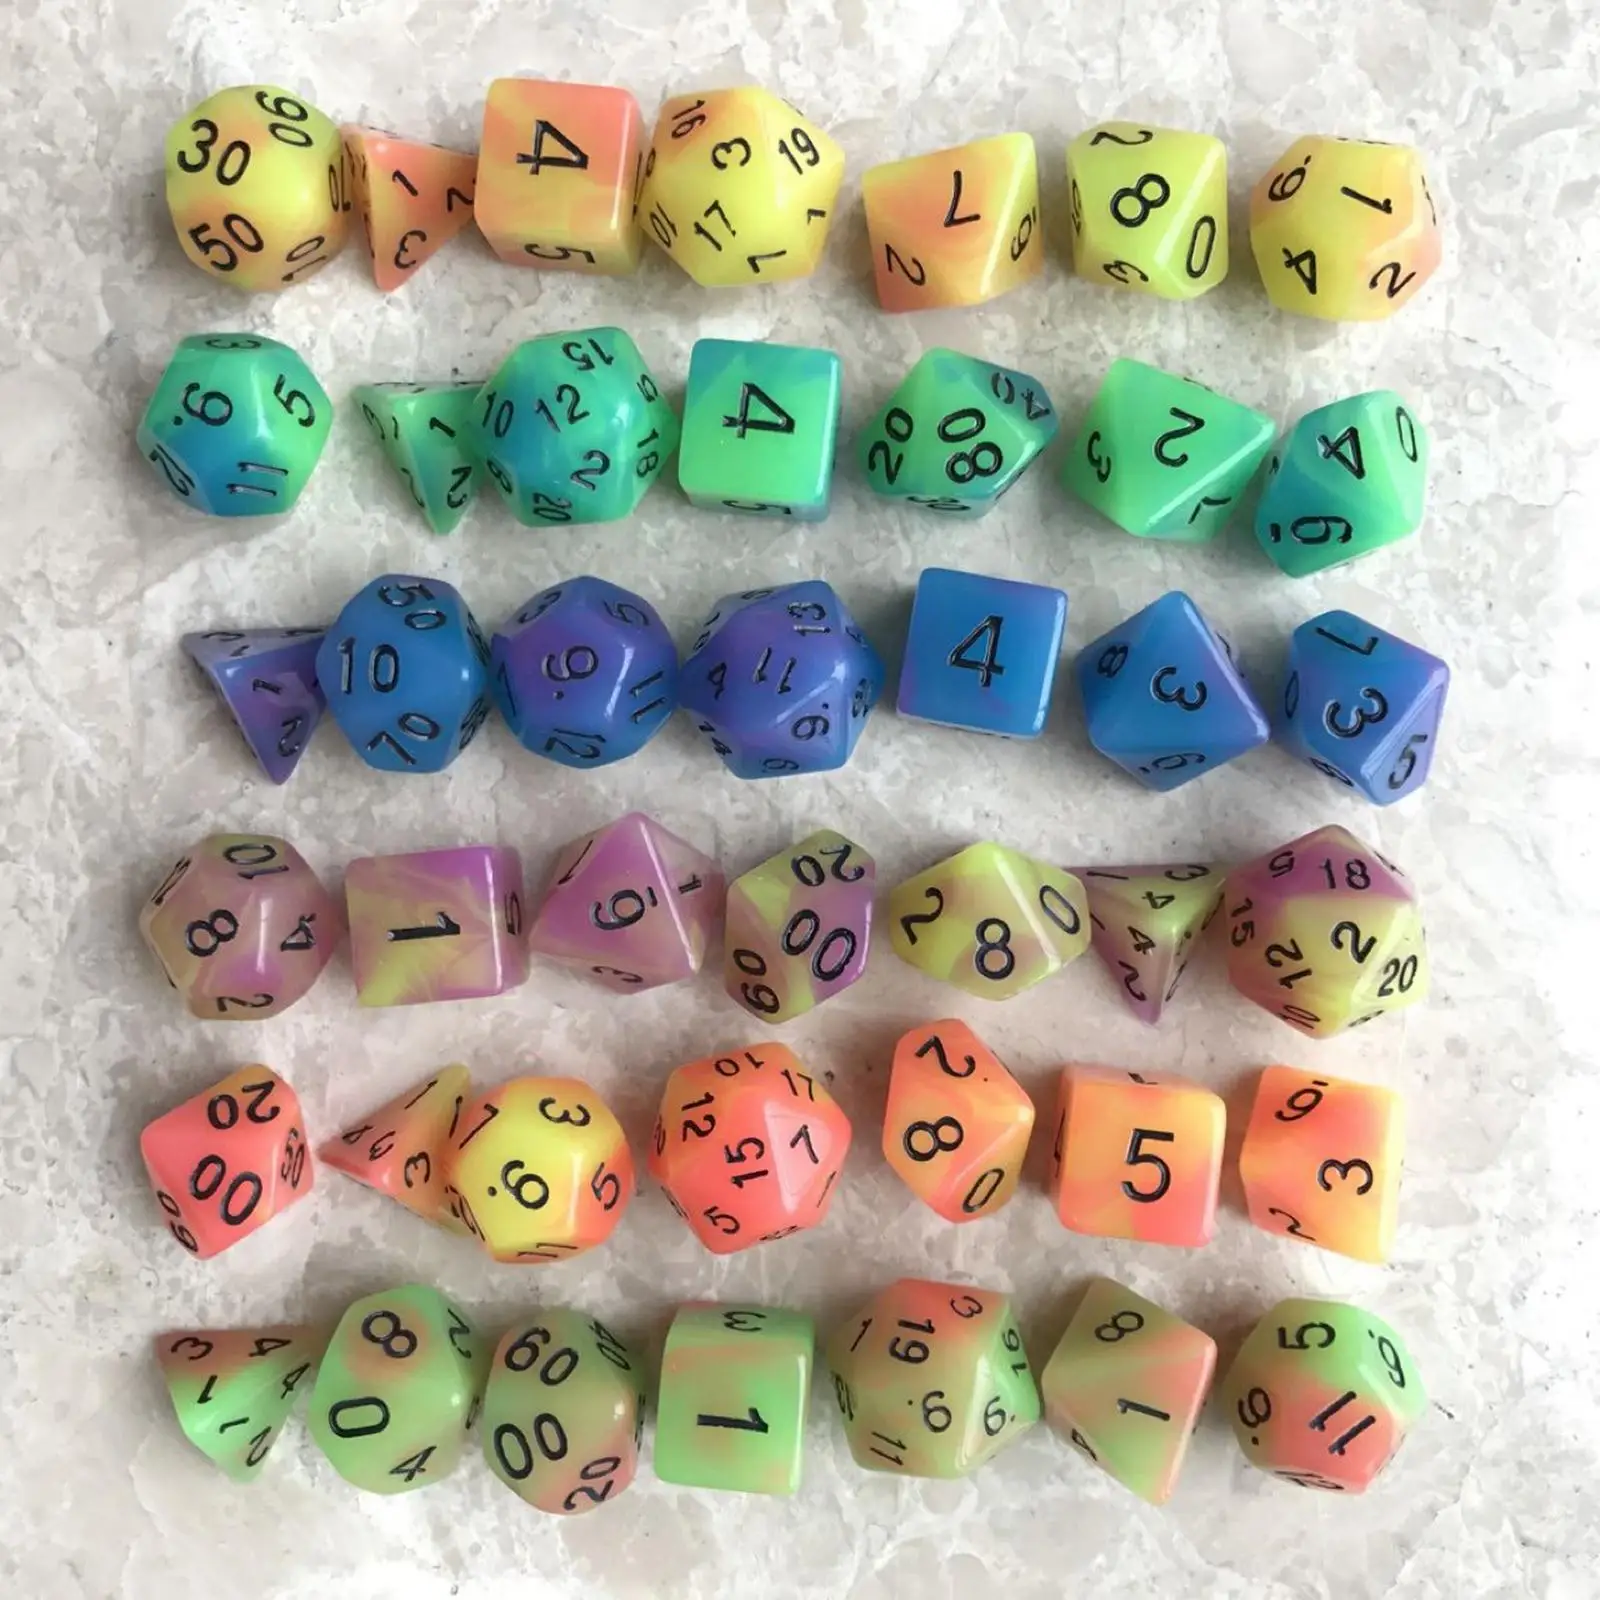 Acrylic Luminous RPG Dices Set D8 D10 D12 D20 Party Toys Glowing Polyhedral Dices Set for DND Math Teaching